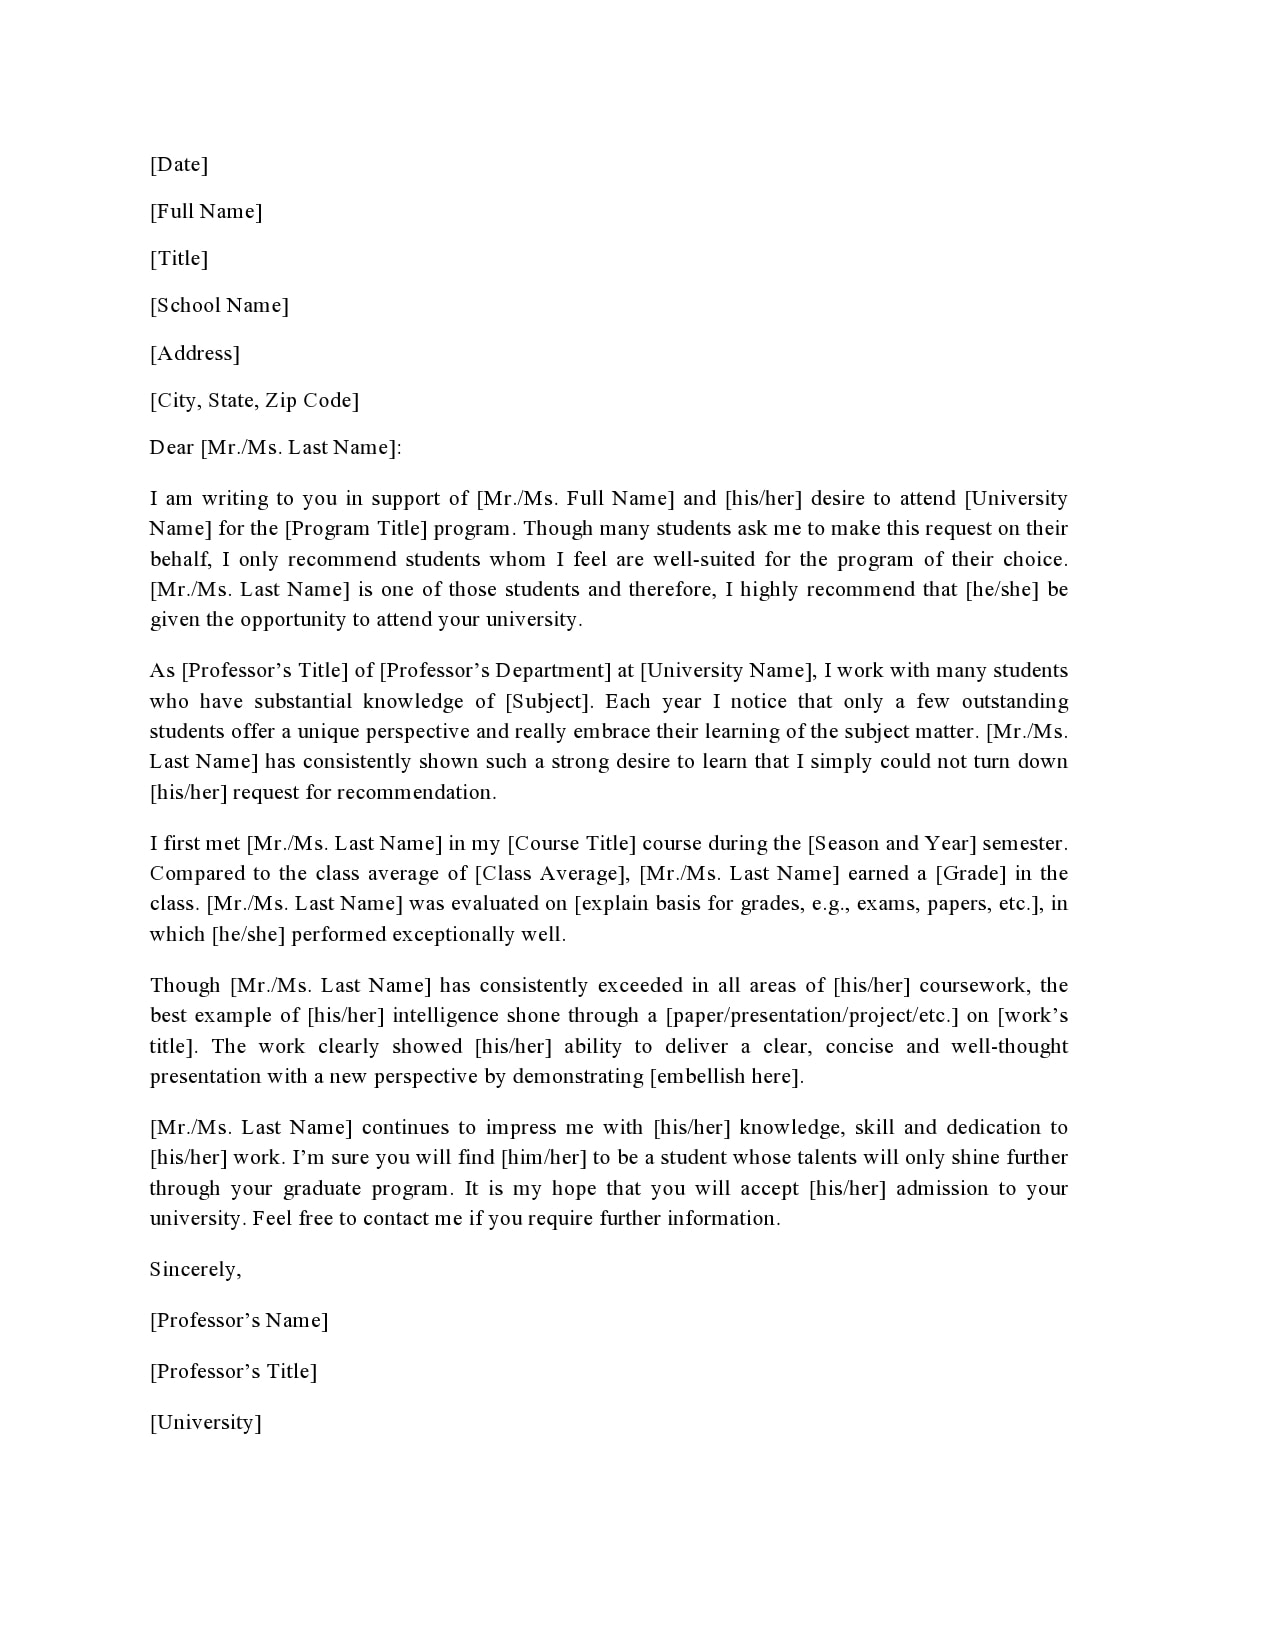 Recommendation Letter For Student From Professor from templatearchive.com